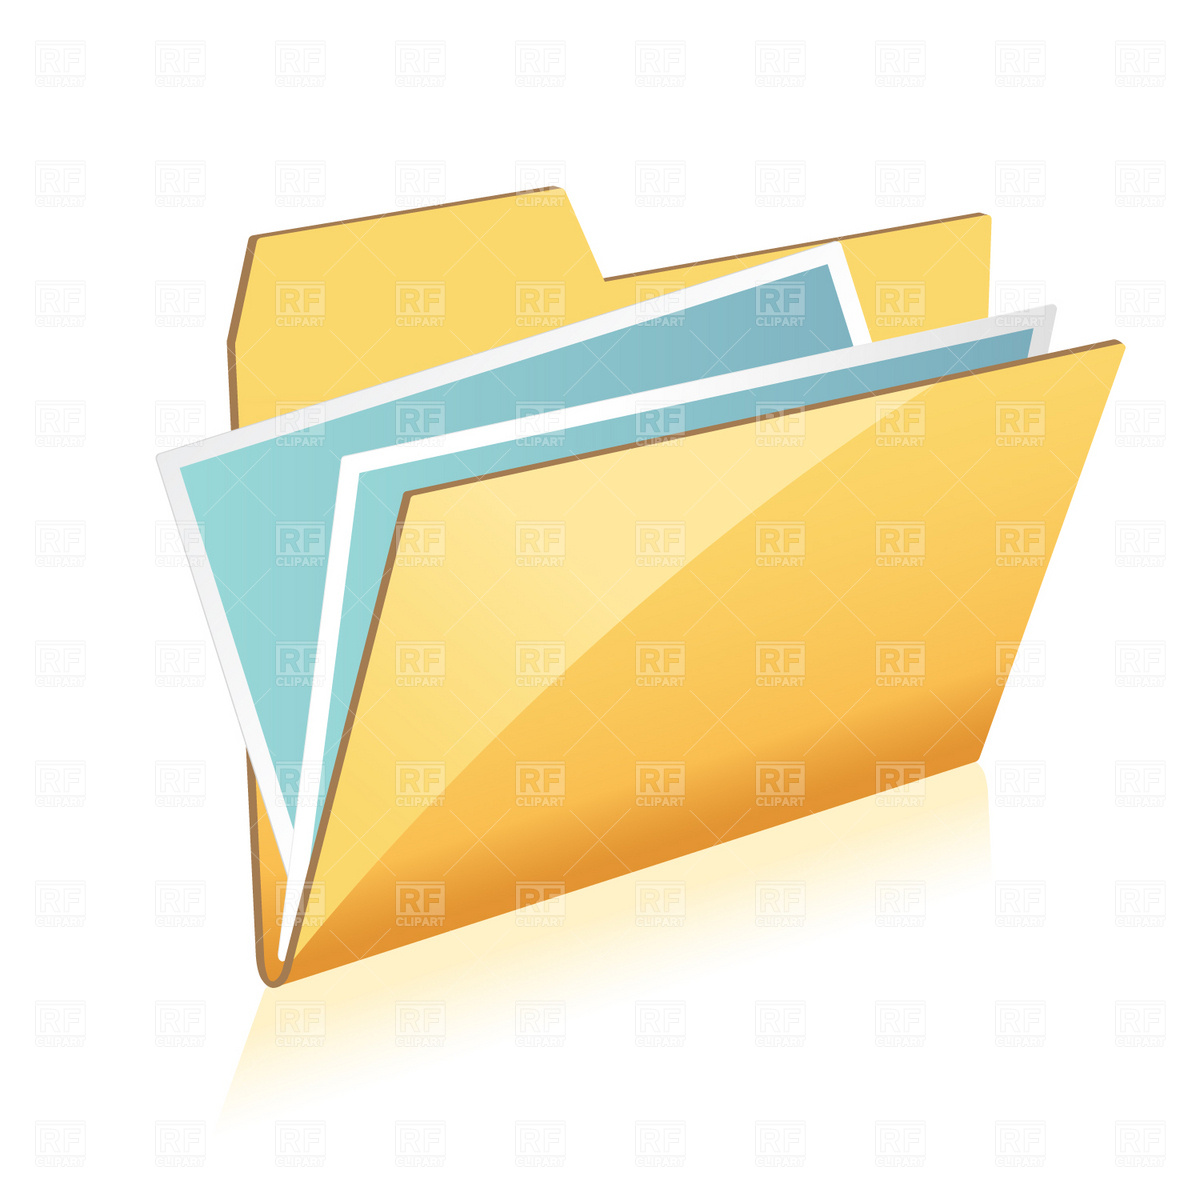 14 Computer Network Icon File Folder Images